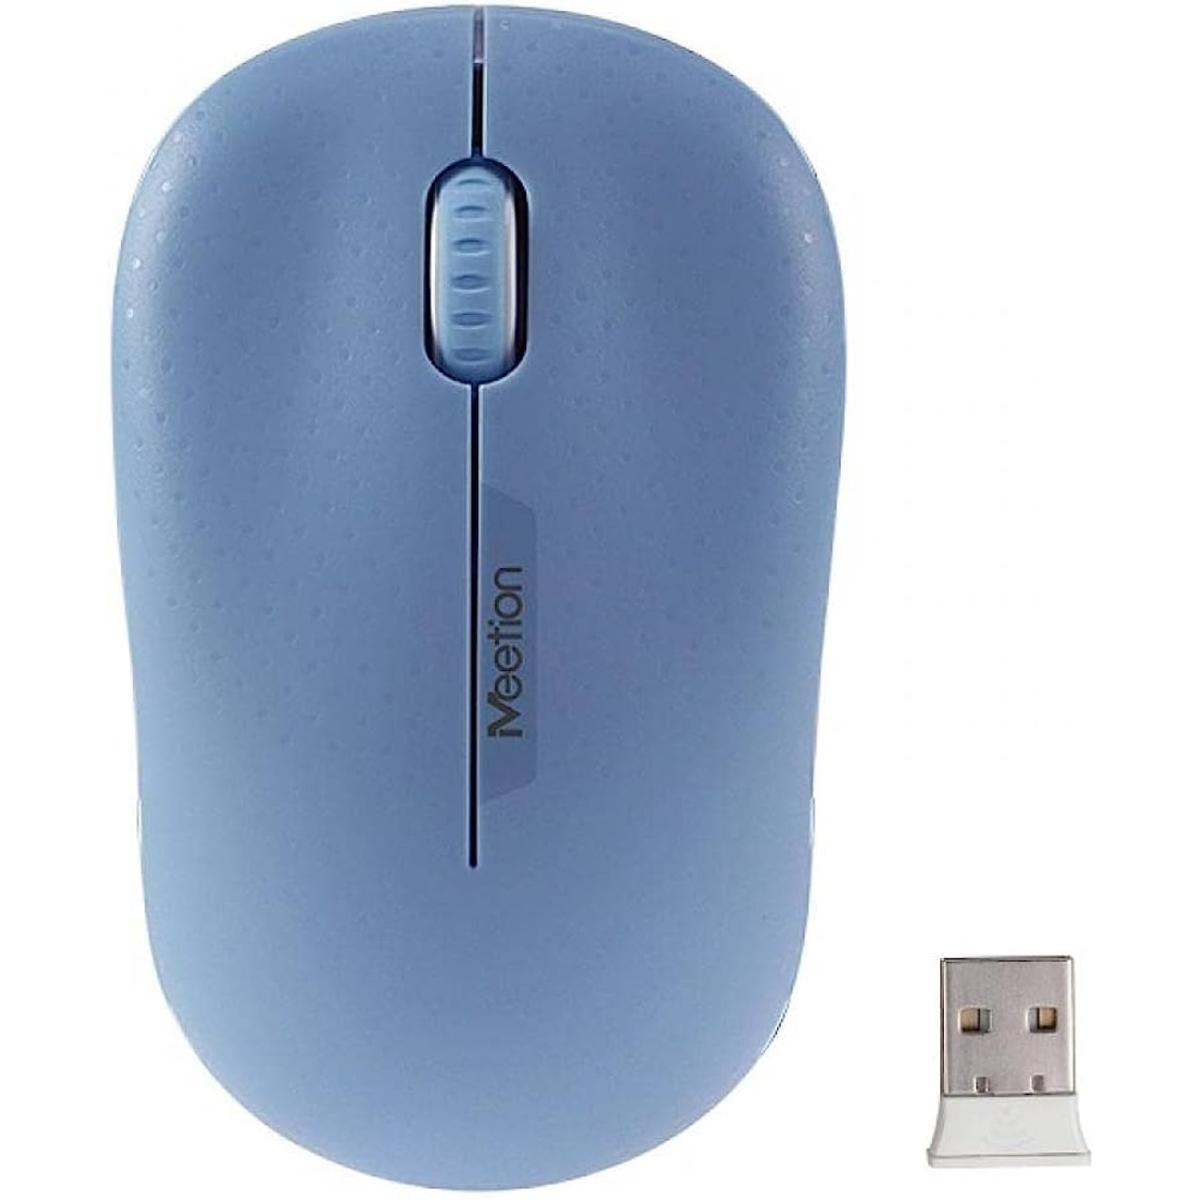 MeeTion Cordless Optical Usb Computer 2.4GHz Wireless Mouse - Blue